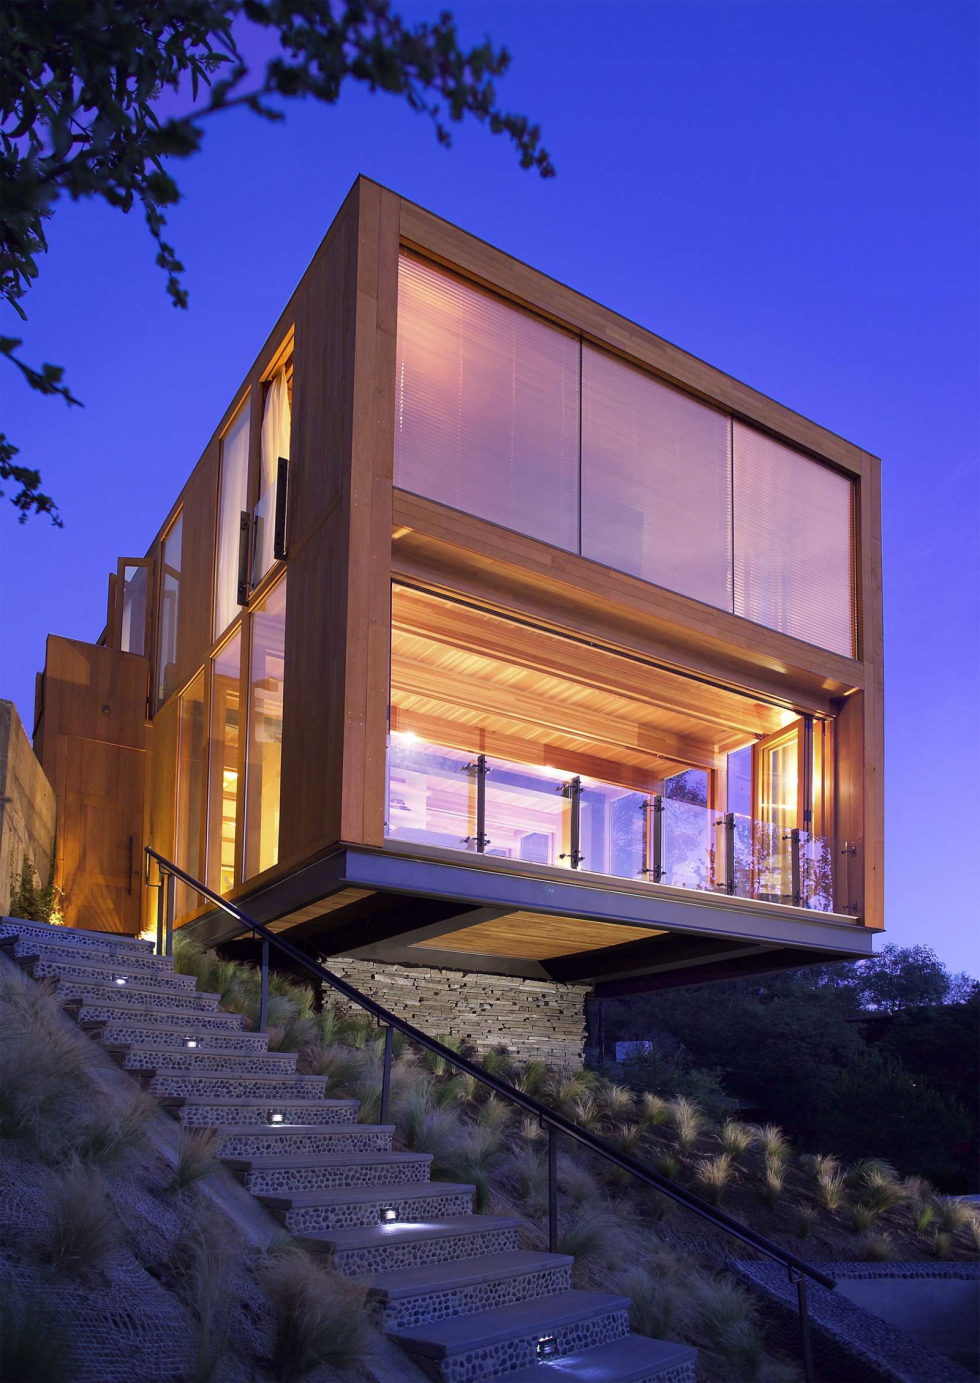 The Hollywood HIlls Box mansion in Los Angeles 1